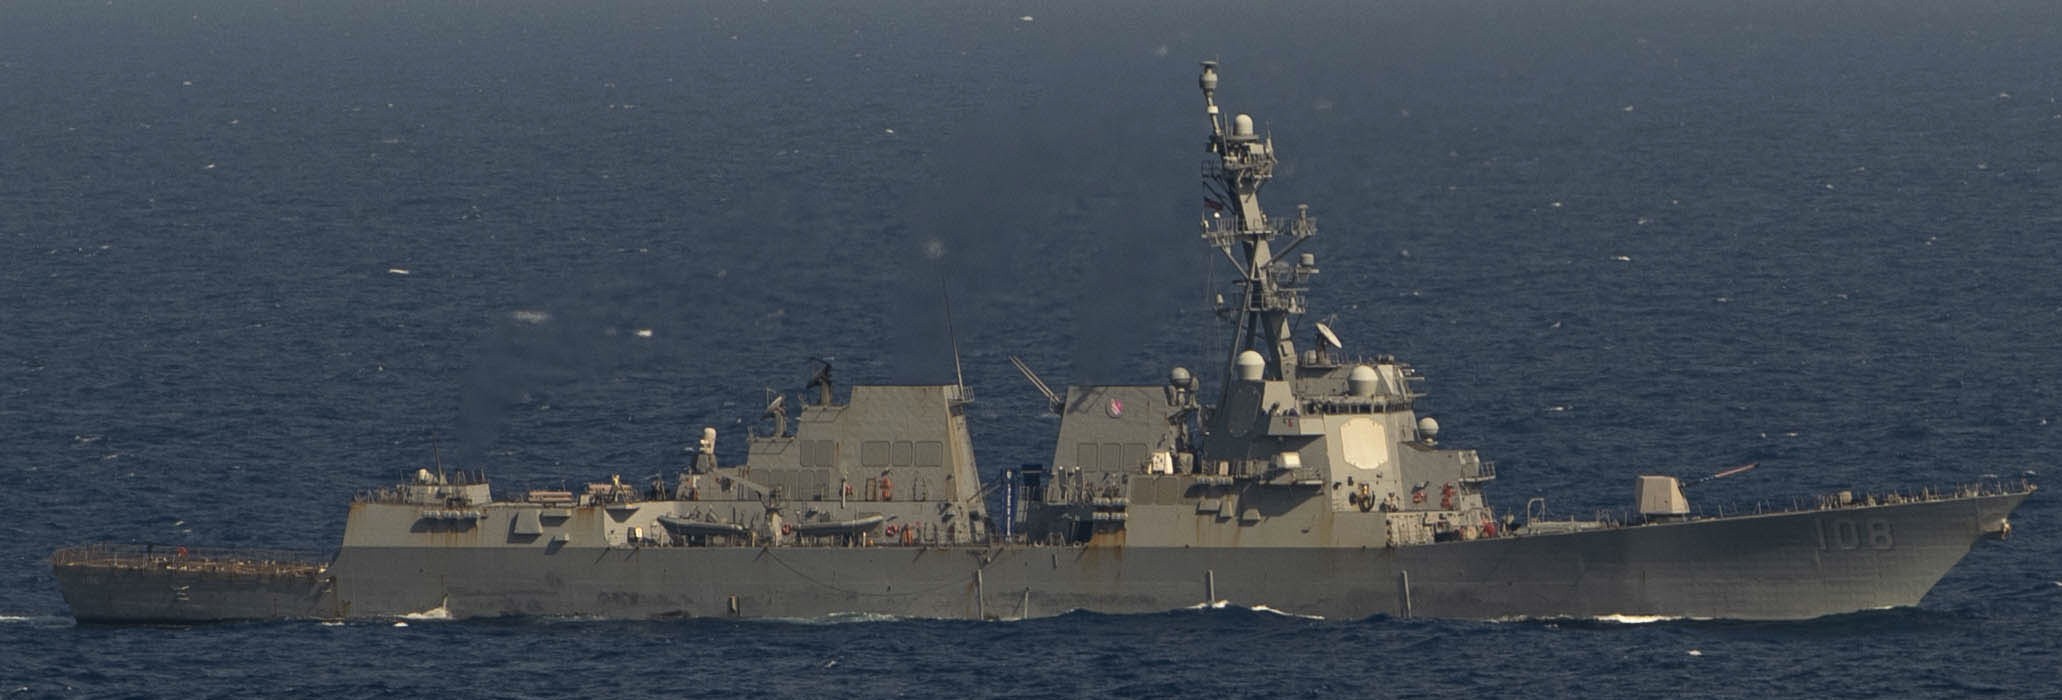 ddg-108 uss wayne e. meyer arleigh burke class guided missile destroyer aegis us navy south china sea 79